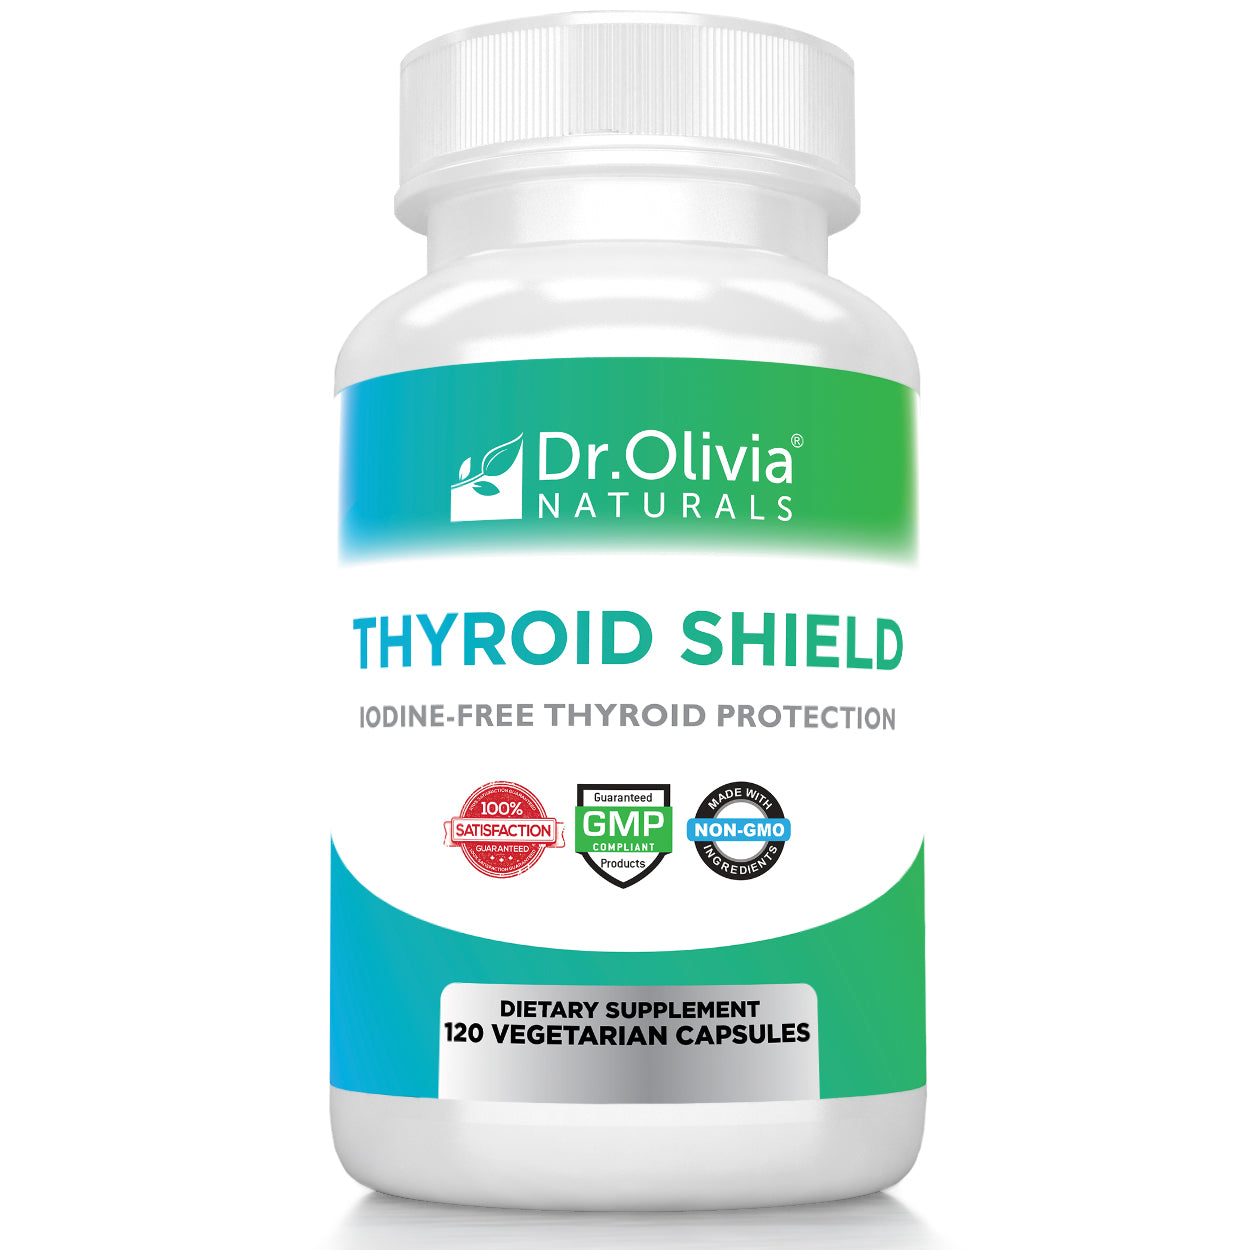 Is your thyroid shield protecting you? Tips for selecting the best